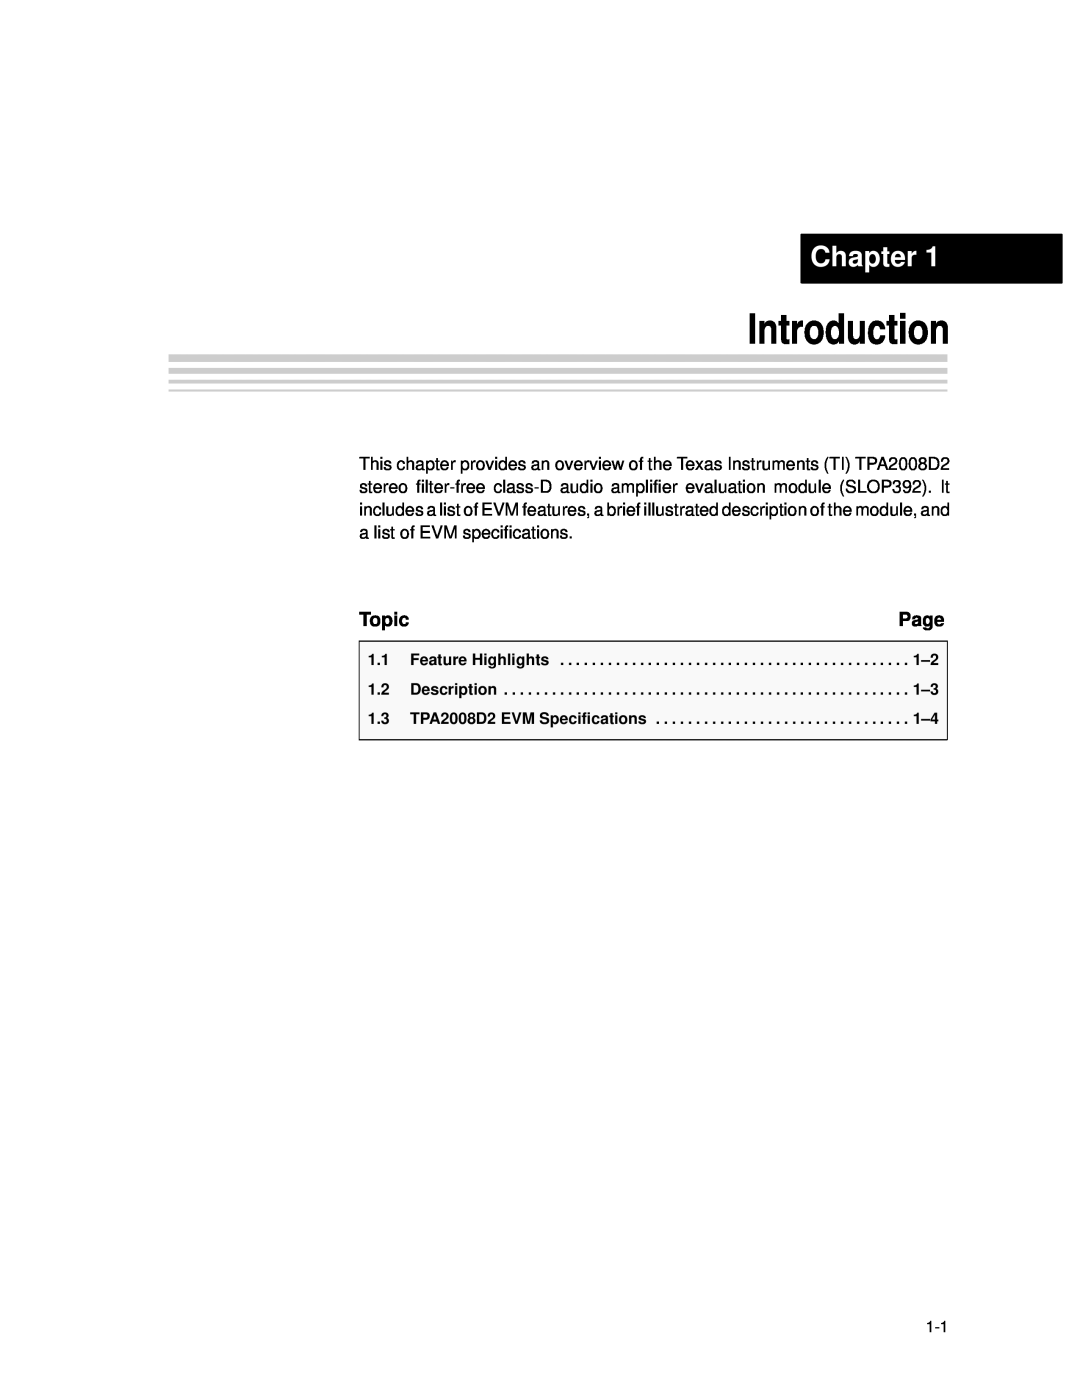 Texas Instruments TPA2008D2 manual Introduction, Chapter, Page, Topic 